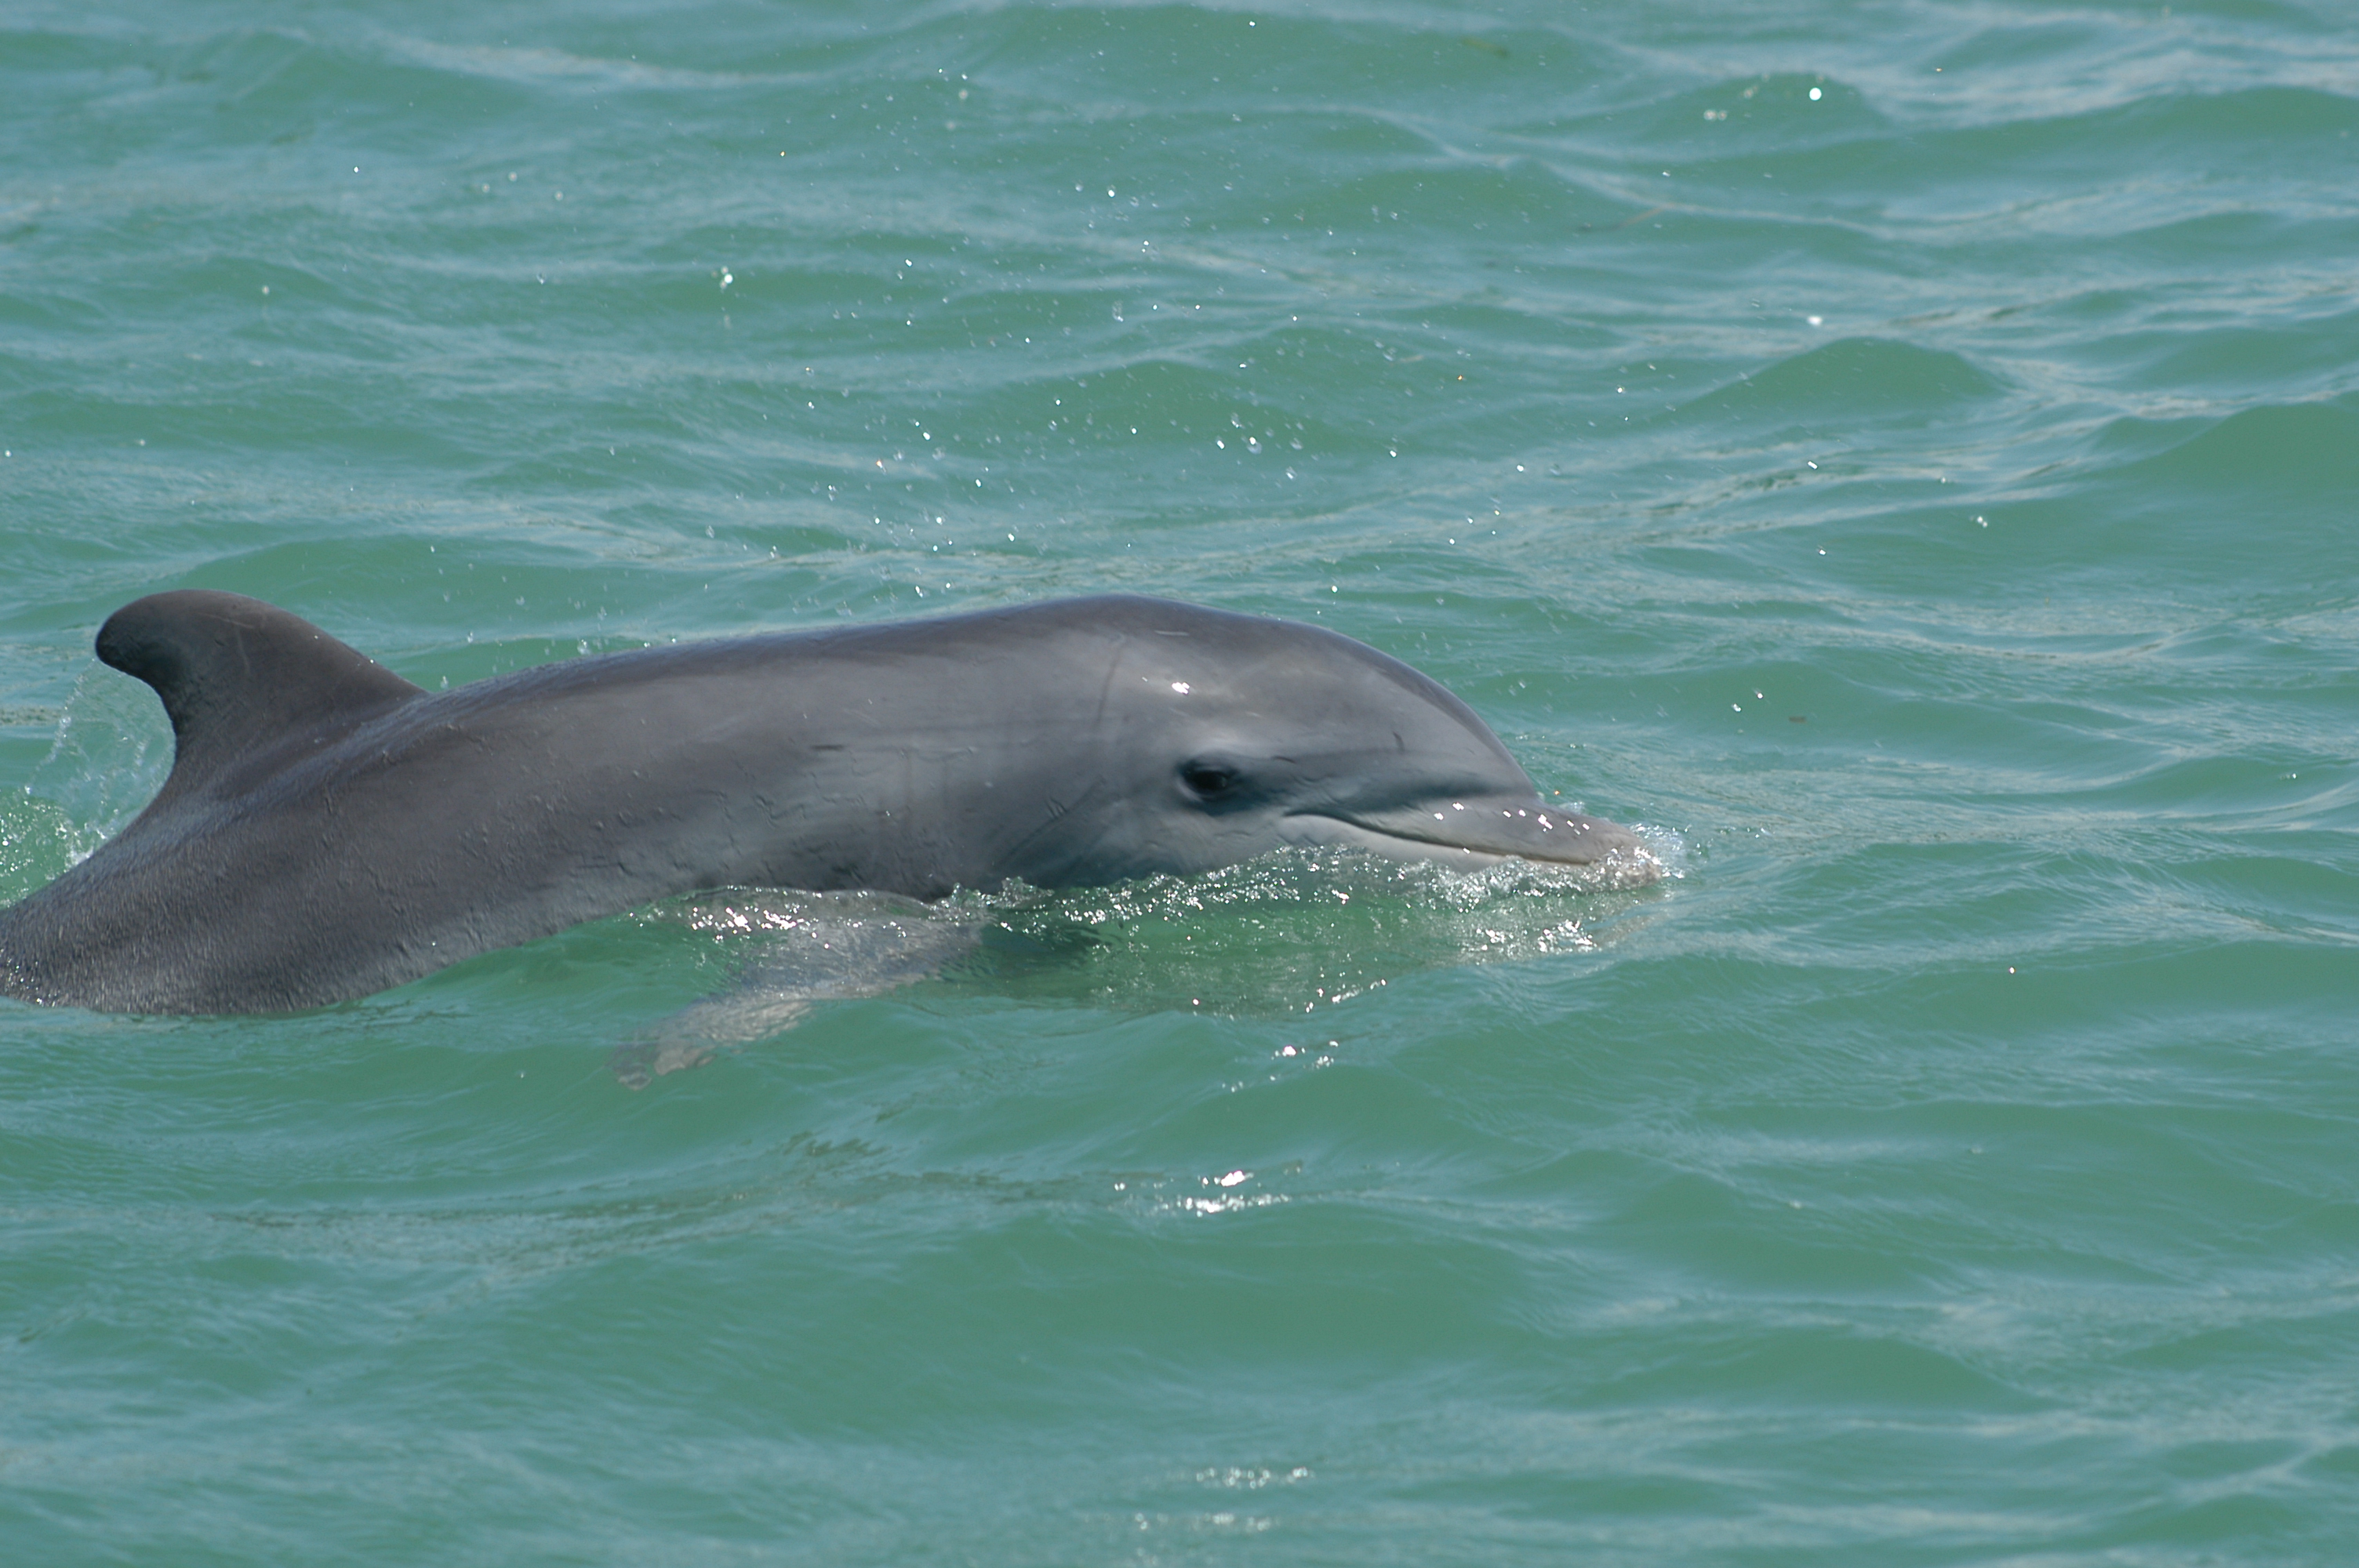 Bottlenose dolphins swim in Sarasota Bay Credit: Photo taken by Sarasota Dolphin Research Program under National Marine Fisheries Service Scientific Research Permit No. 20455.